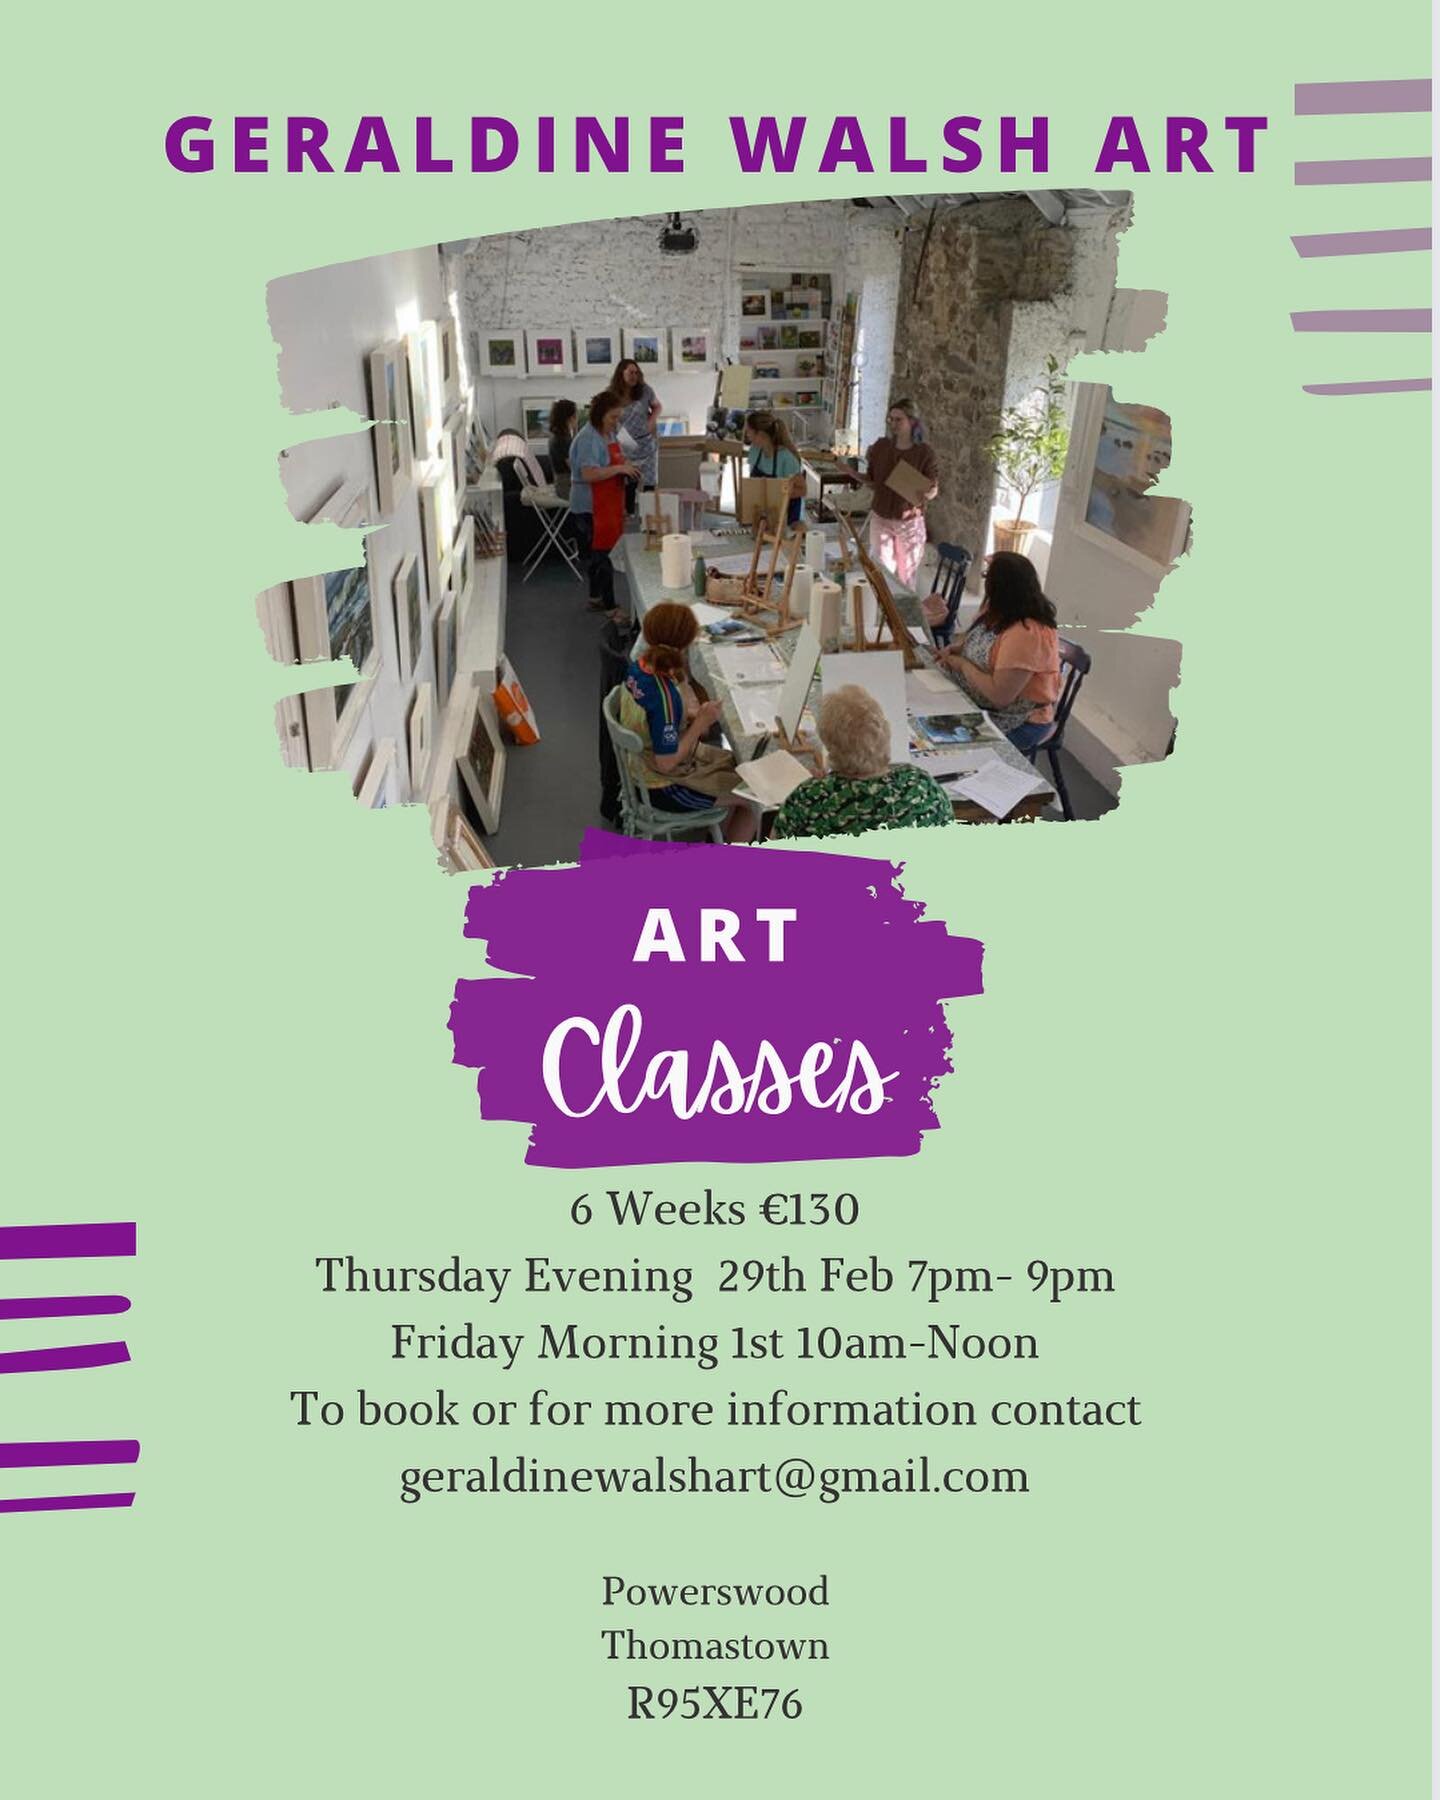 Explore your creativity with our Thursday evening art classes and Friday morning oil painting sessions at my beautiful studio! 🖌️ Unleash your inner artist in a welcoming environment surrounded by inspiration. Whether you&rsquo;re a beginner or seas